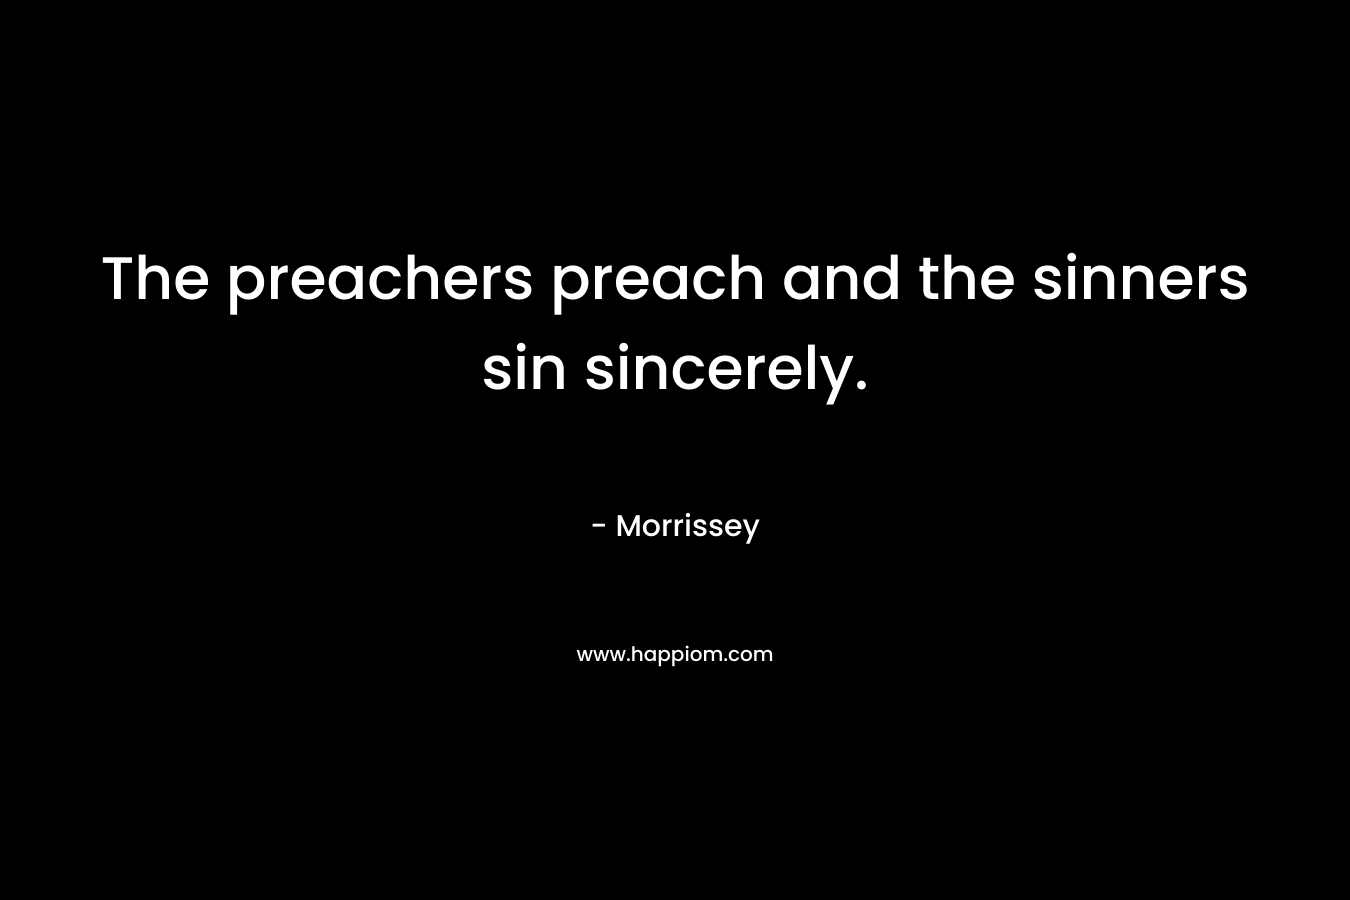 The preachers preach and the sinners sin sincerely. – Morrissey